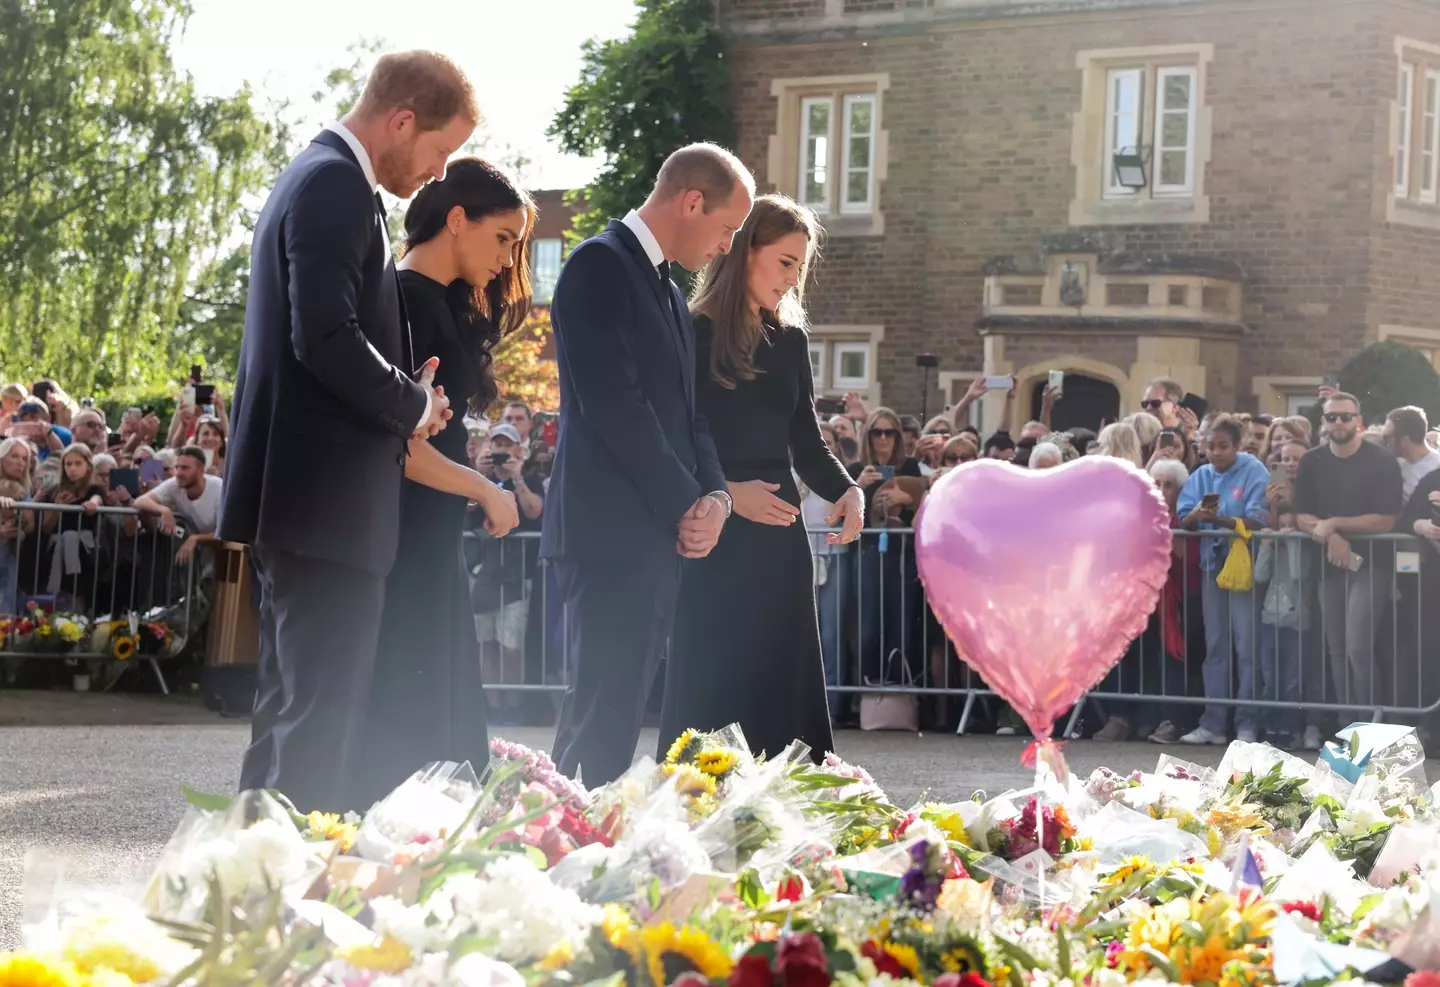 The couples viewed floral tributes for the Queen.